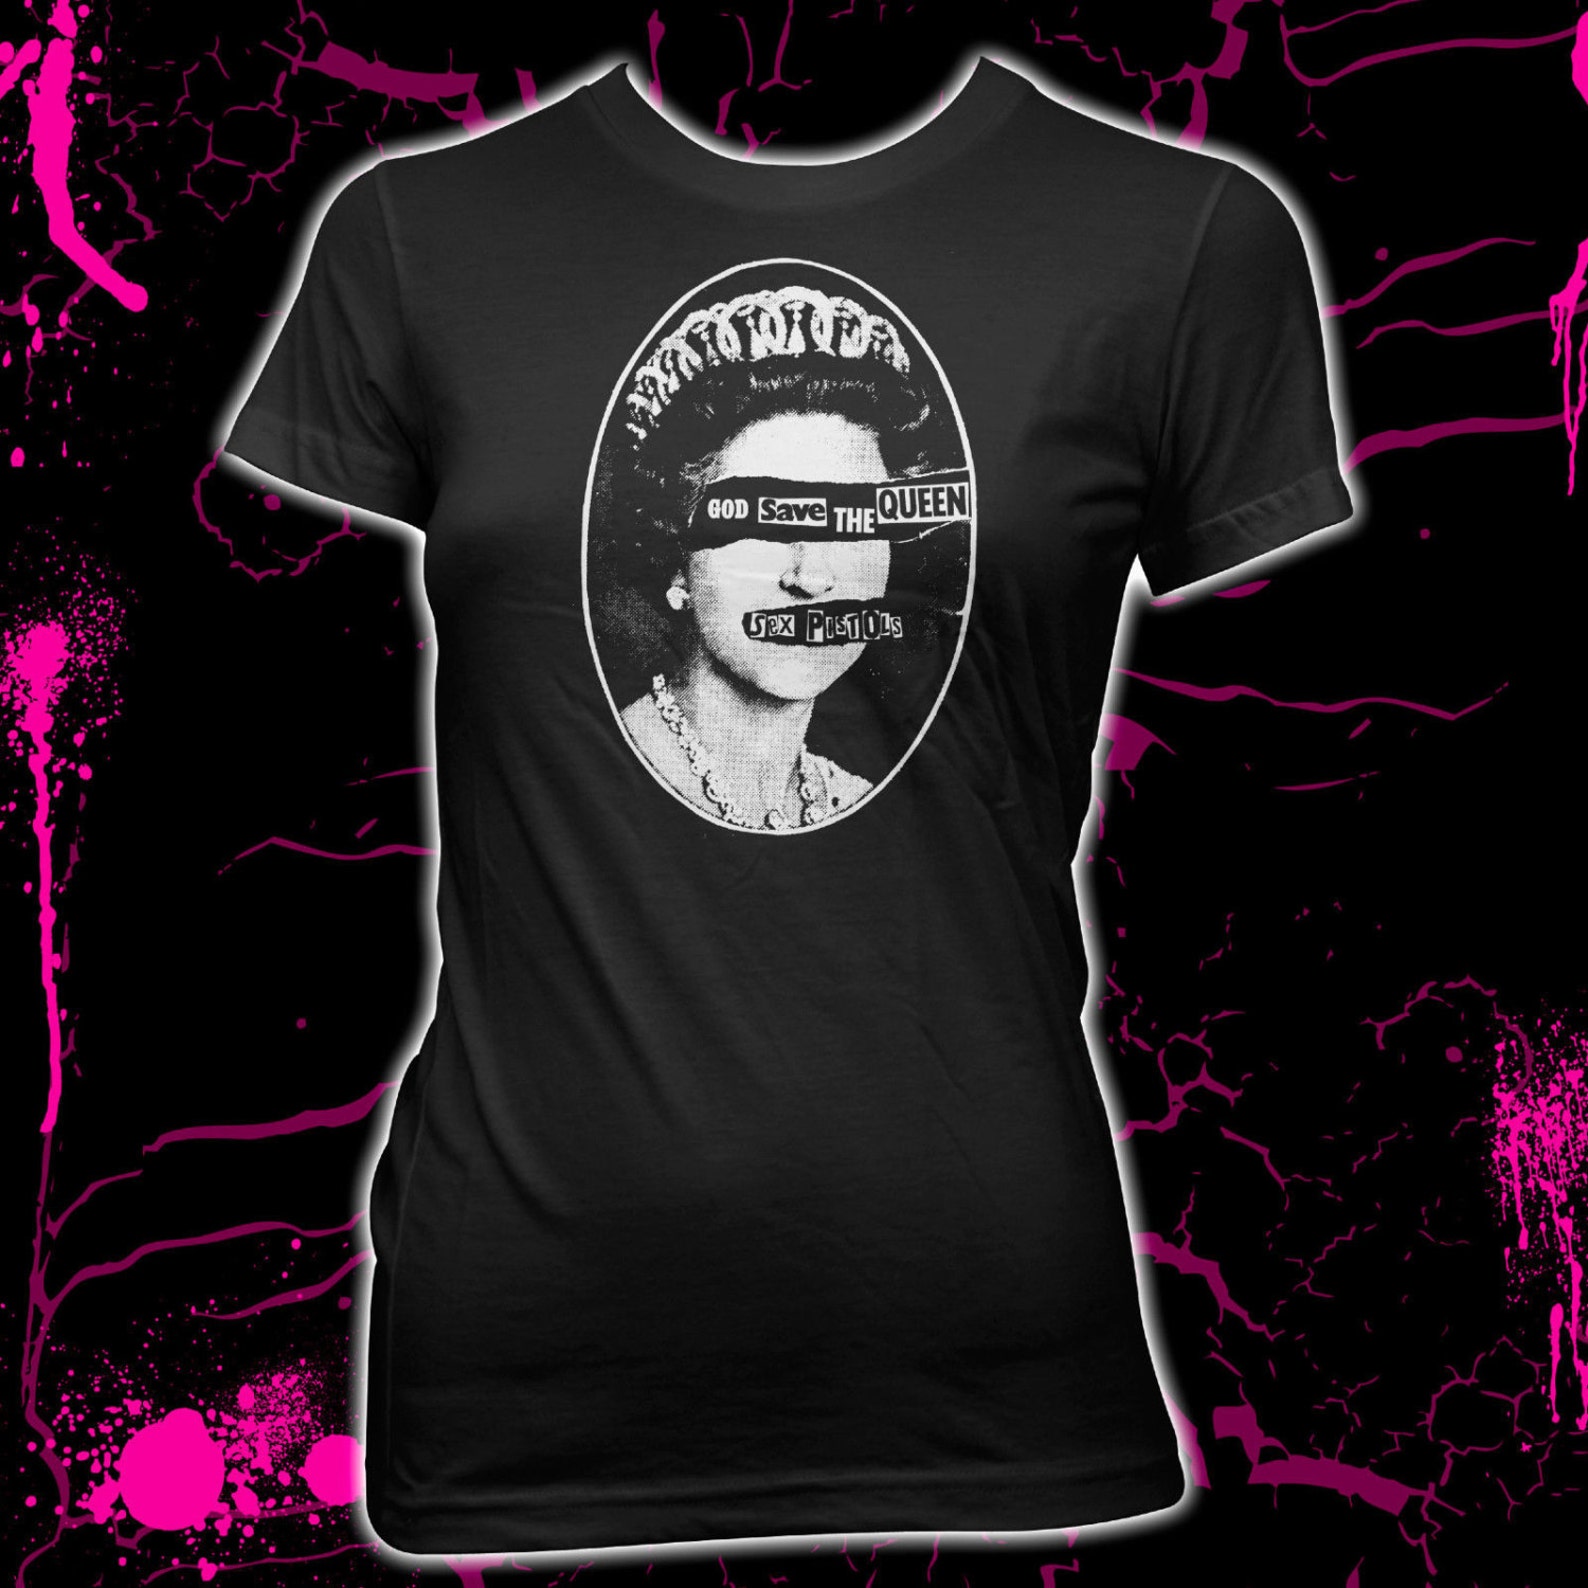 Sex Pistols - God Save the Queen - Punk - Women's Hand screened, Pre-S...